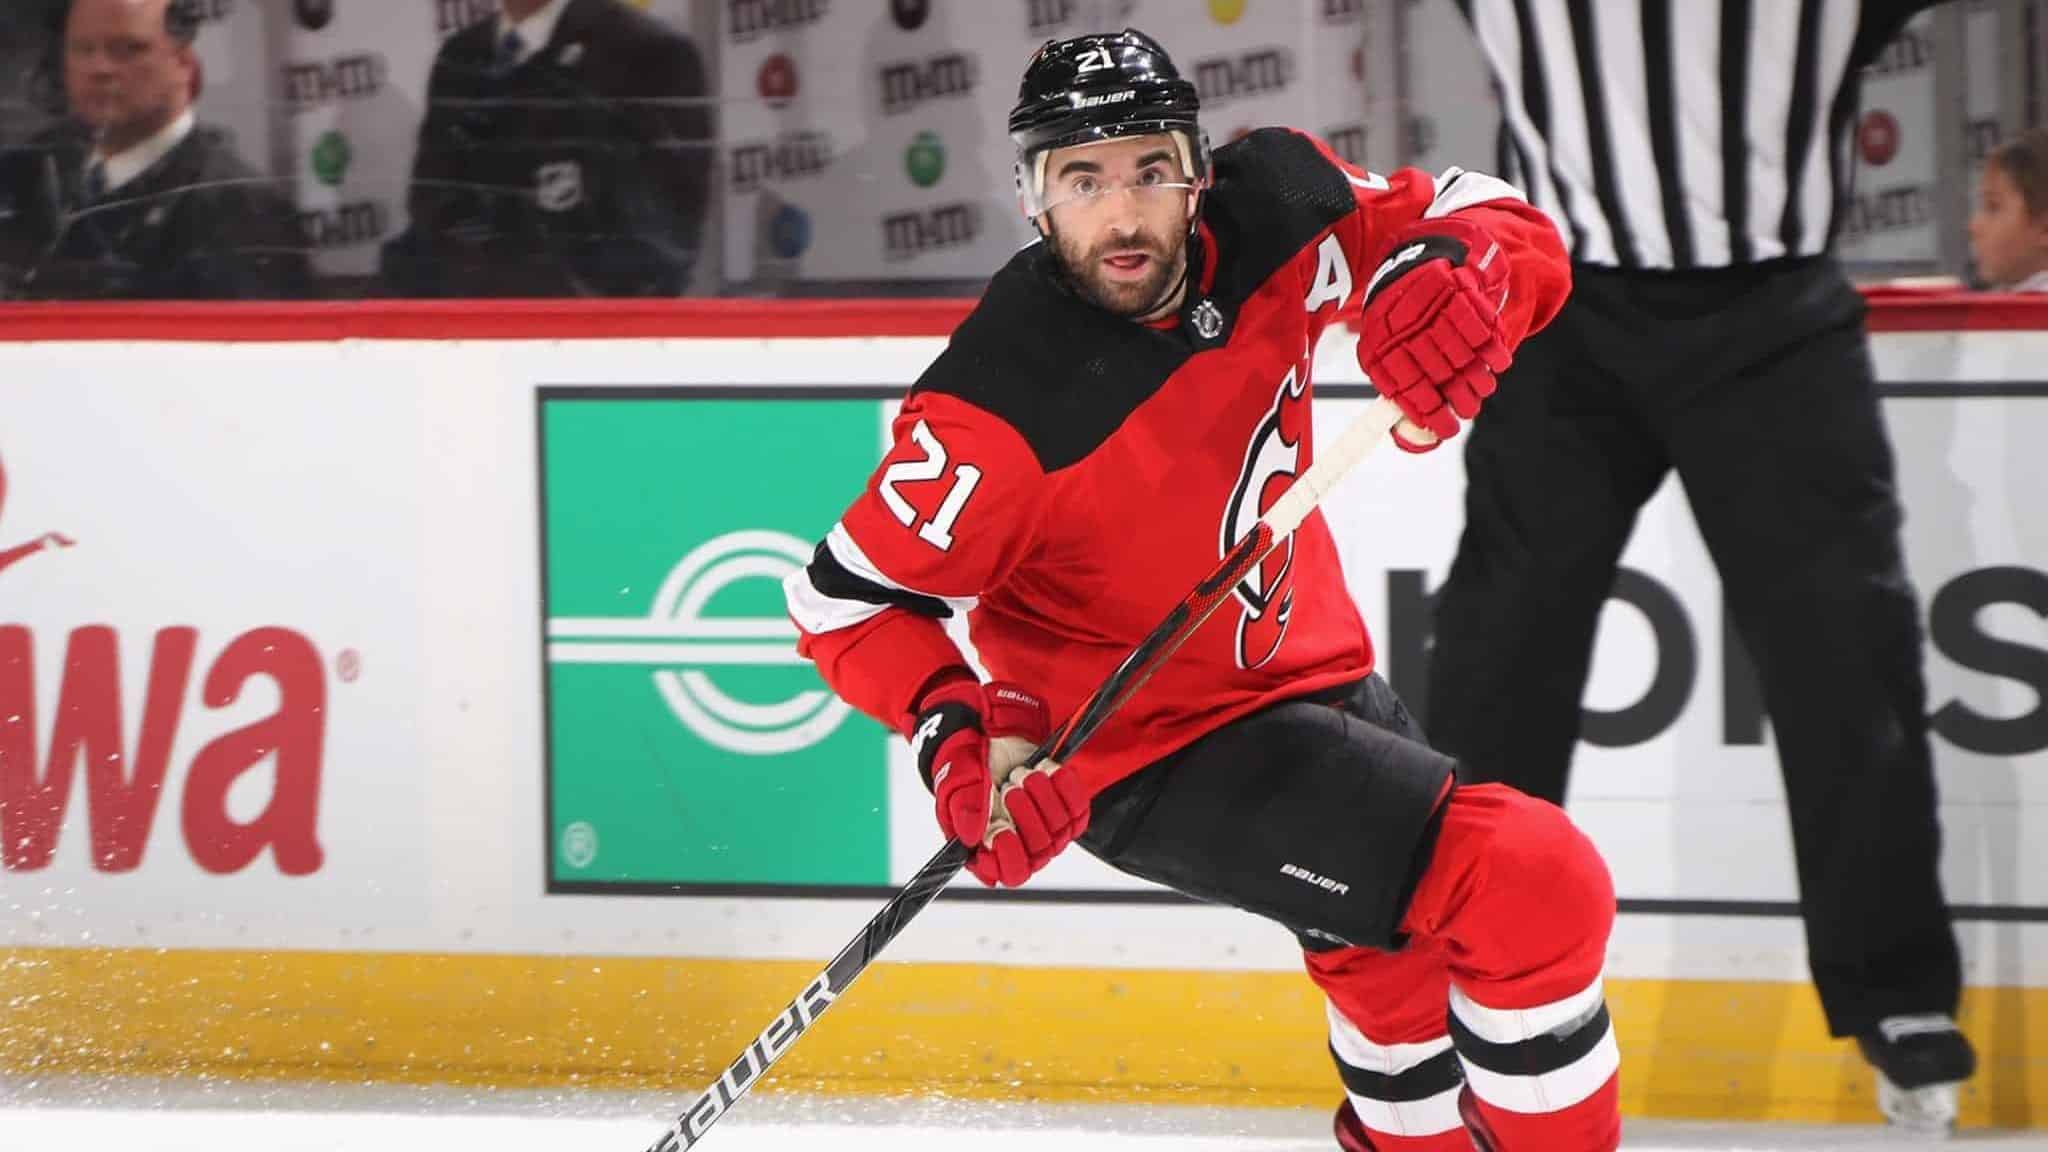 NEWARK, NEW JERSEY - DECEMBER 18: Kyle Palmieri #21 of the New Jersey Devils skates against the Anaheim Ducks at the Prudential Center on December 18, 2019 in Newark, New Jersey.